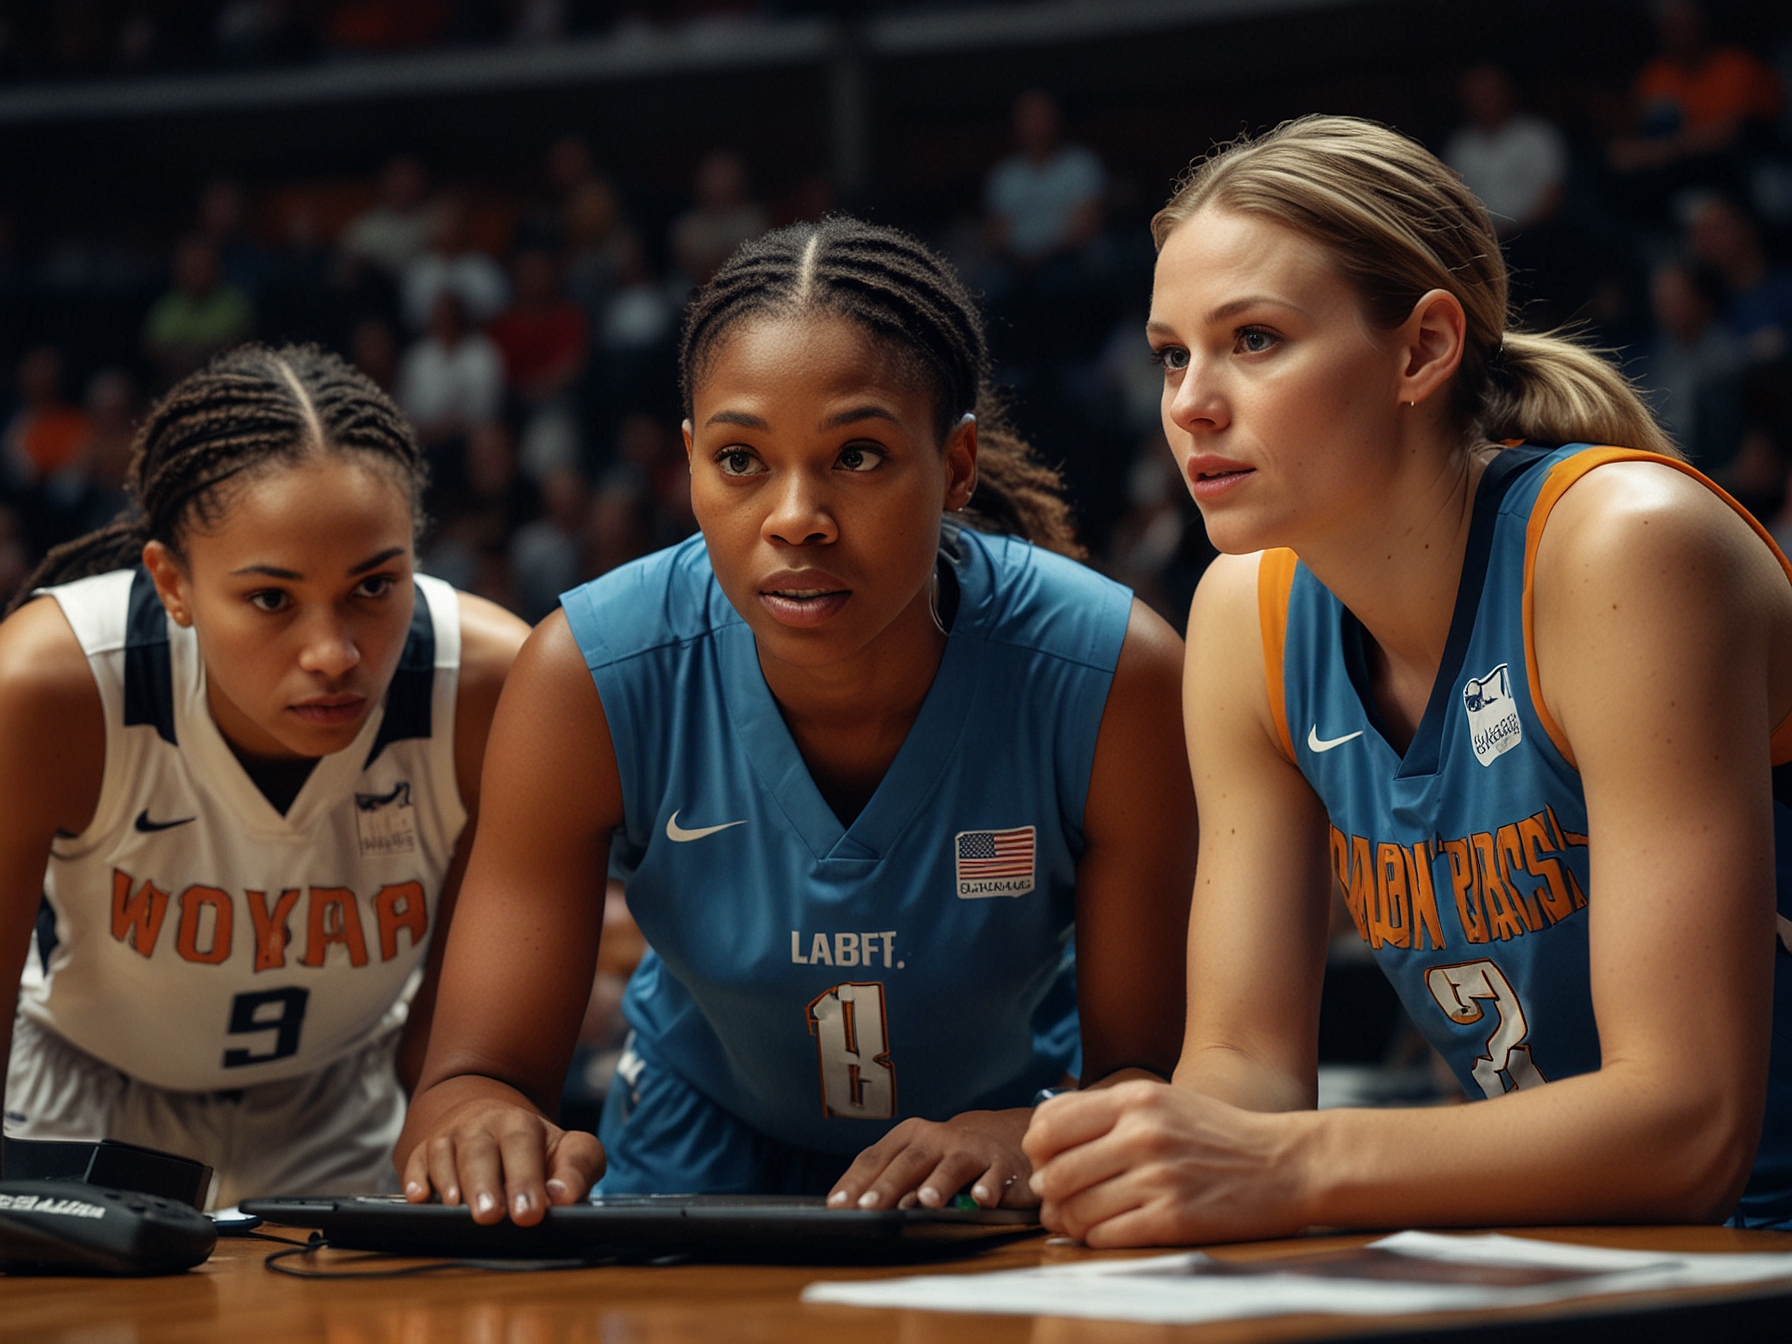 The WNBA official reviewing game footage on a monitor, with Clark’s teammates showing support in the background, emphasizing the scrutiny and controversy following the foul incident.